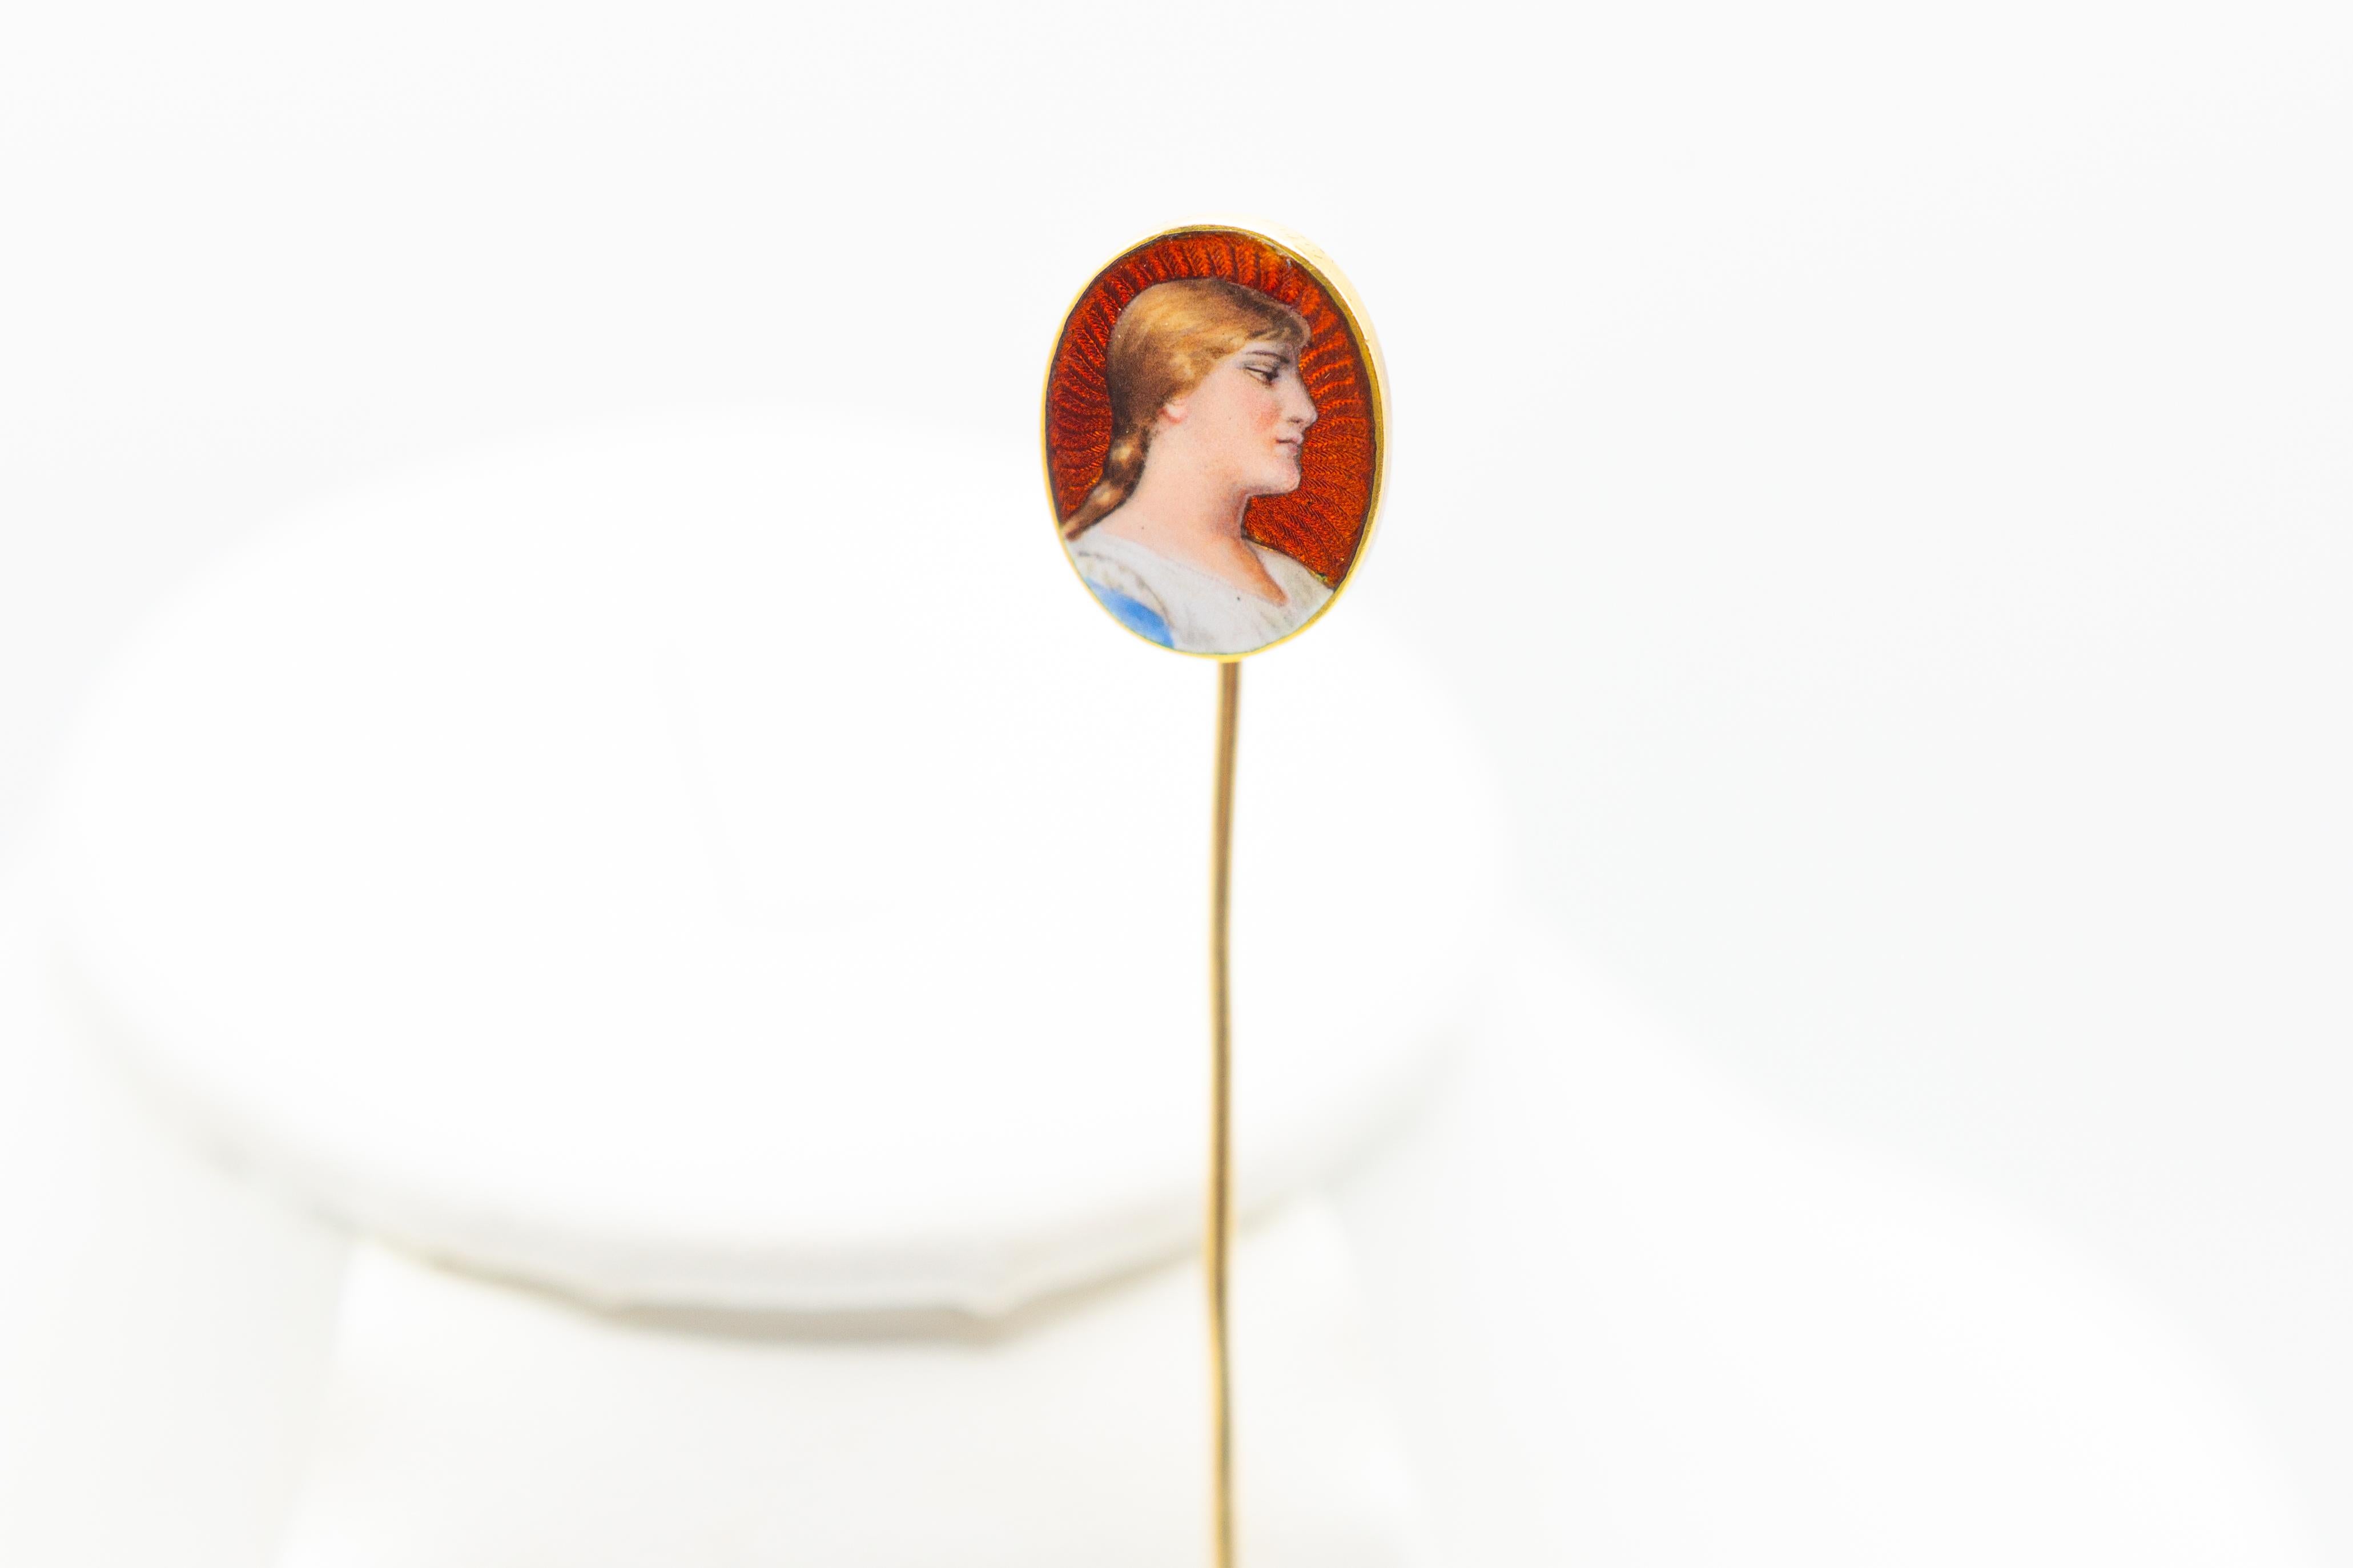 18k gold enamel Guilloche Victorian portrait stick pin. 1800s circa. The head of the stick pin measures over 1/2 inch x almost 1/2 inch and the pin is hallmarked, but it is difficult to see. It's been carefully acid tested to be 18k gold and weighs